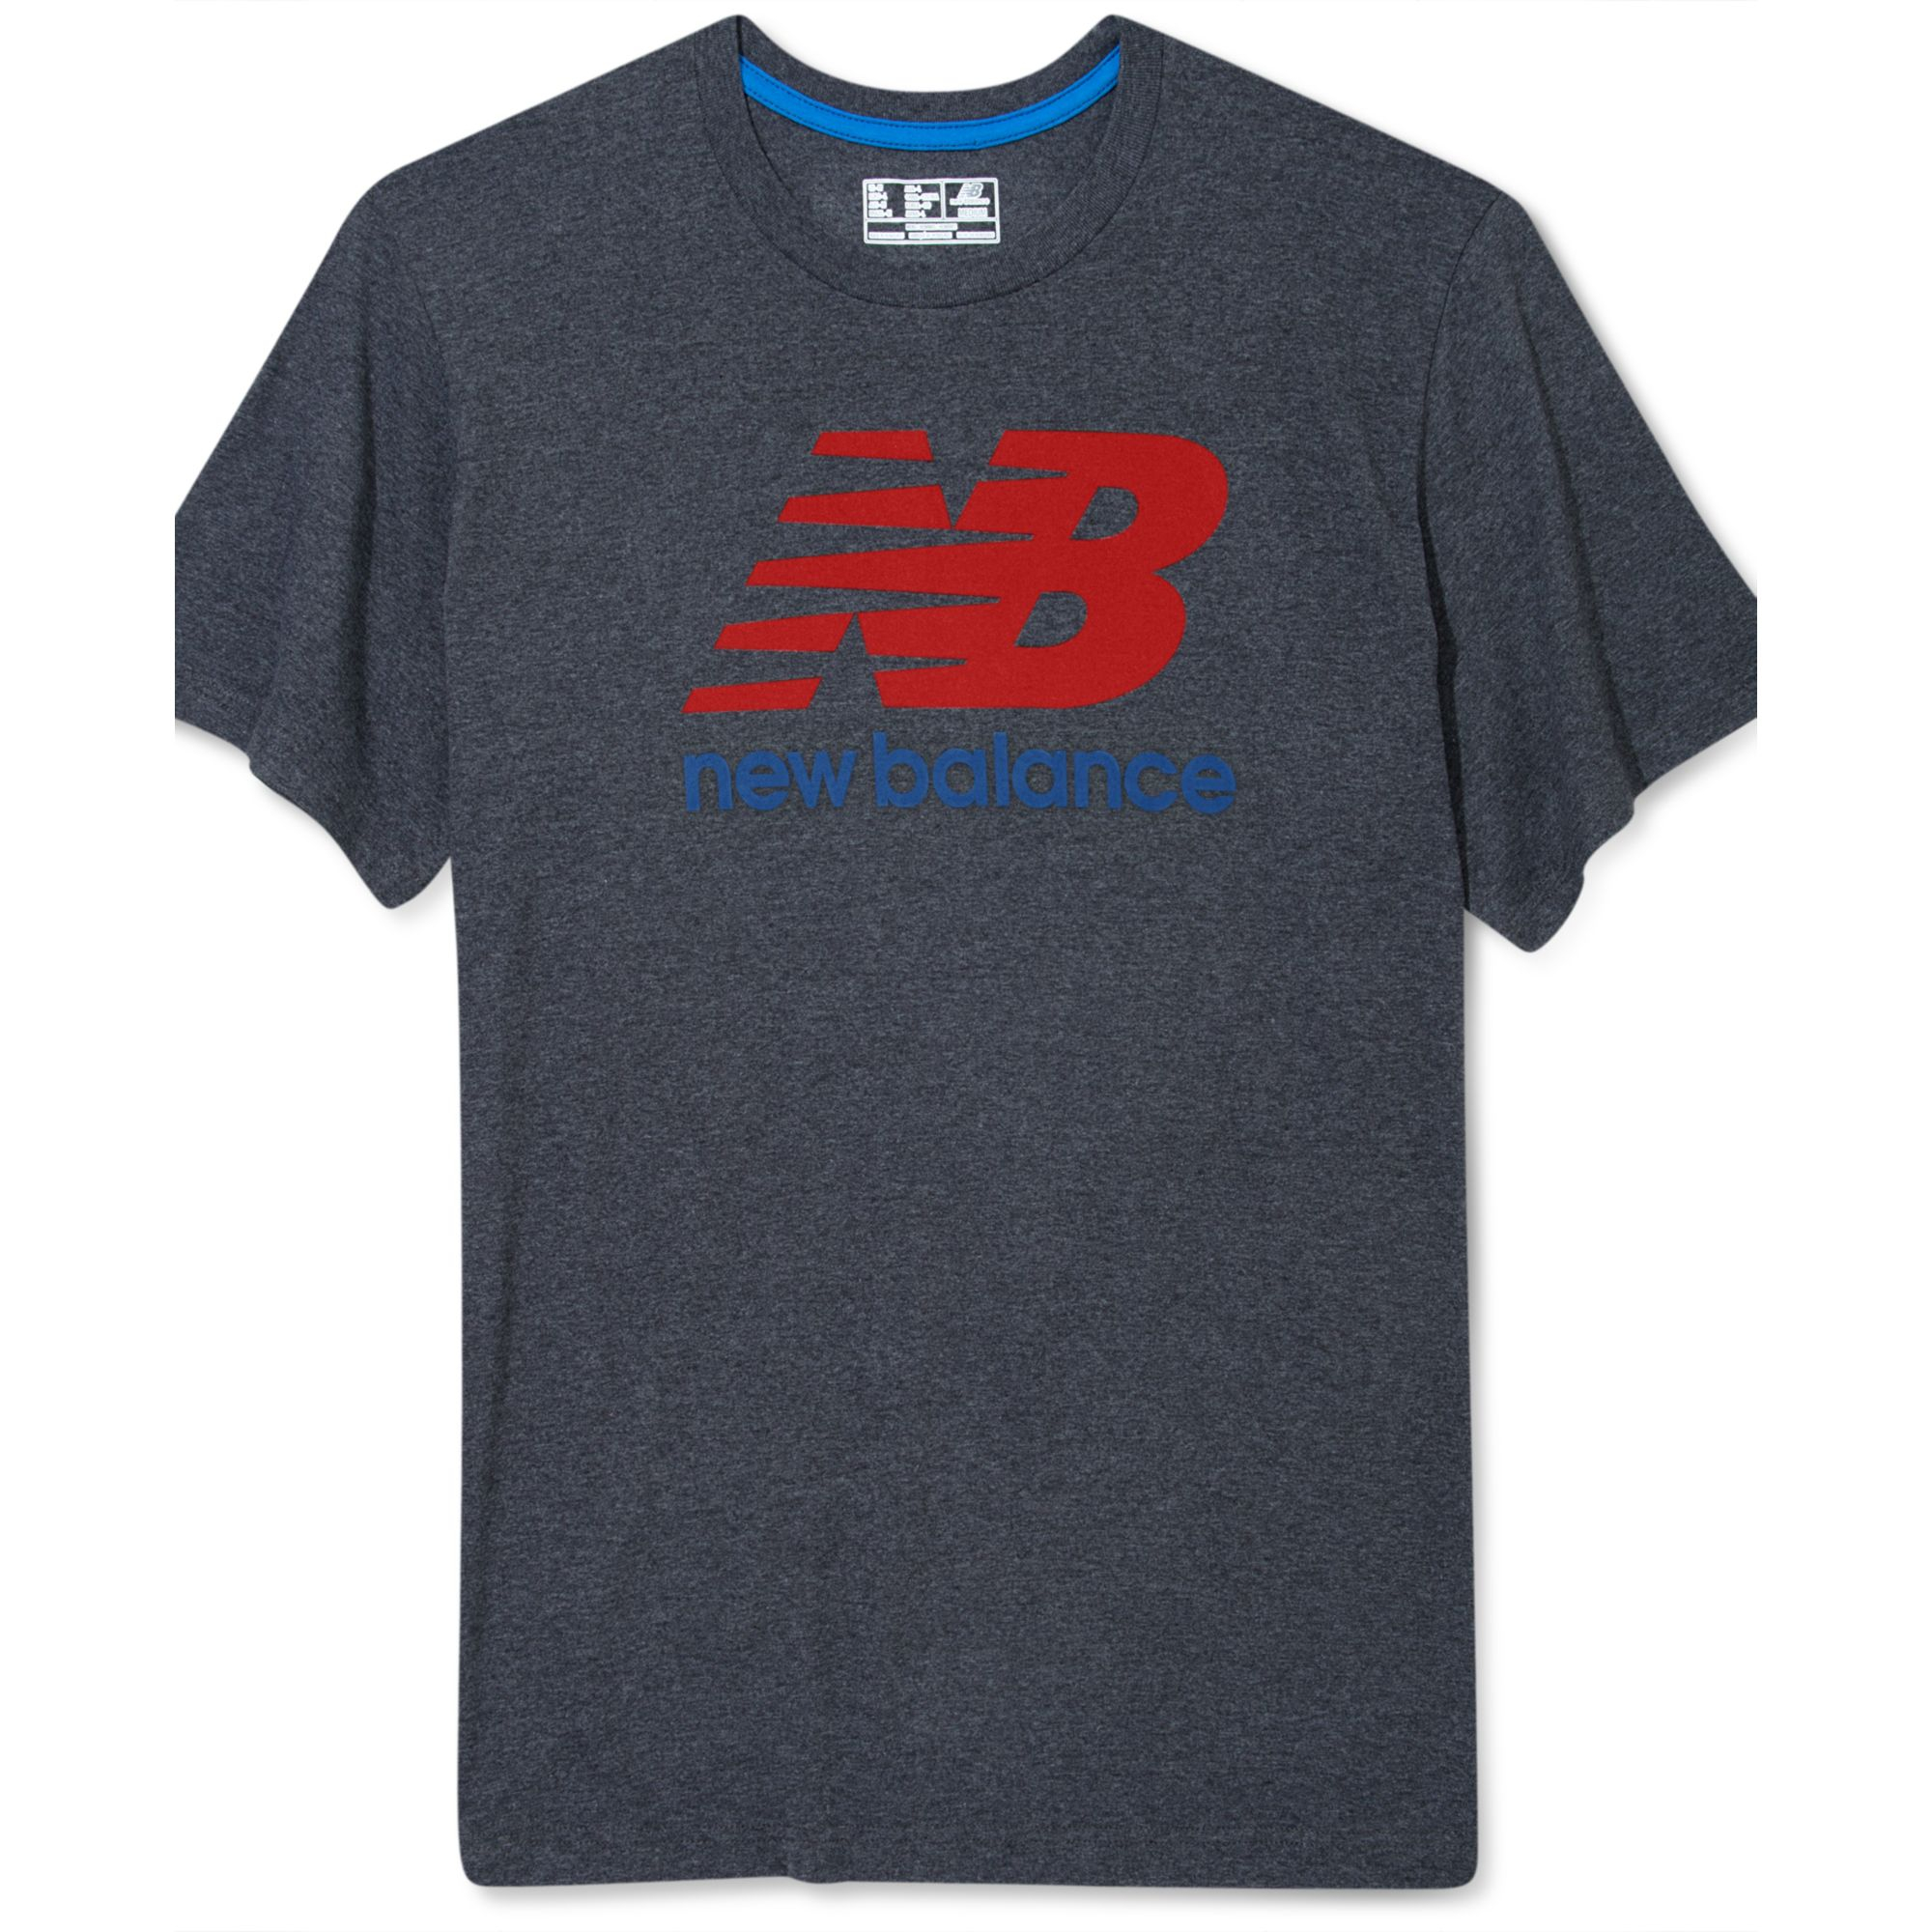 New Balance Graphic Logo T Shirt in Heather Charcoal/Red (Gray) for Men ...